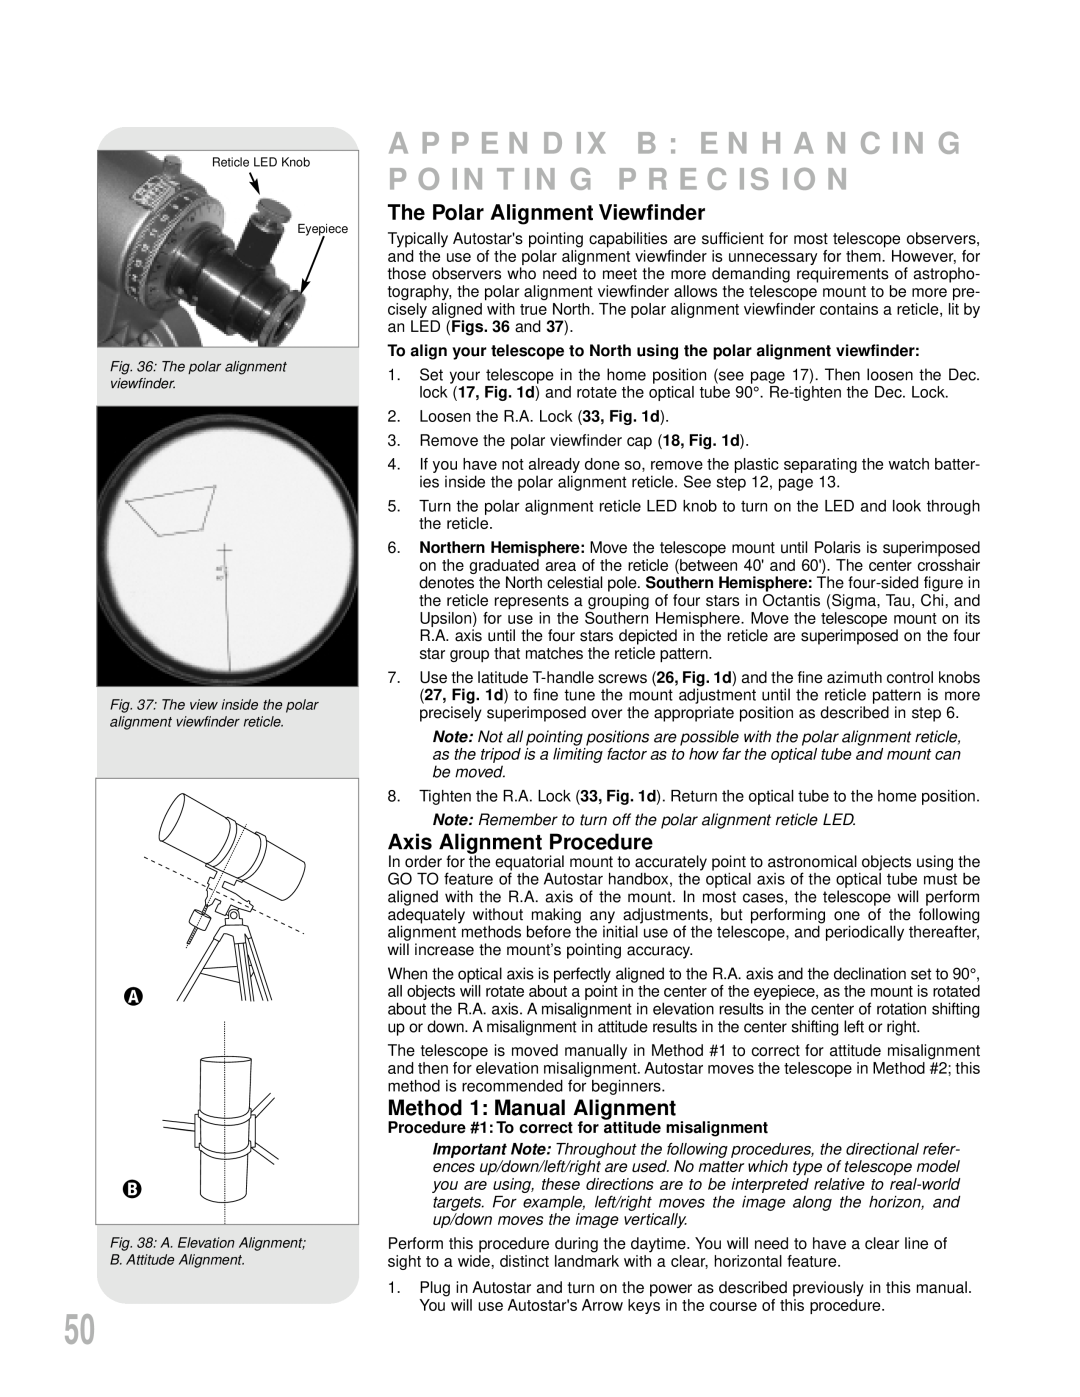 Meade LXD55 instruction manual The Polar Alignment Viewfinder, Axis Alignment Procedure, Method 1 Manual Alignment 